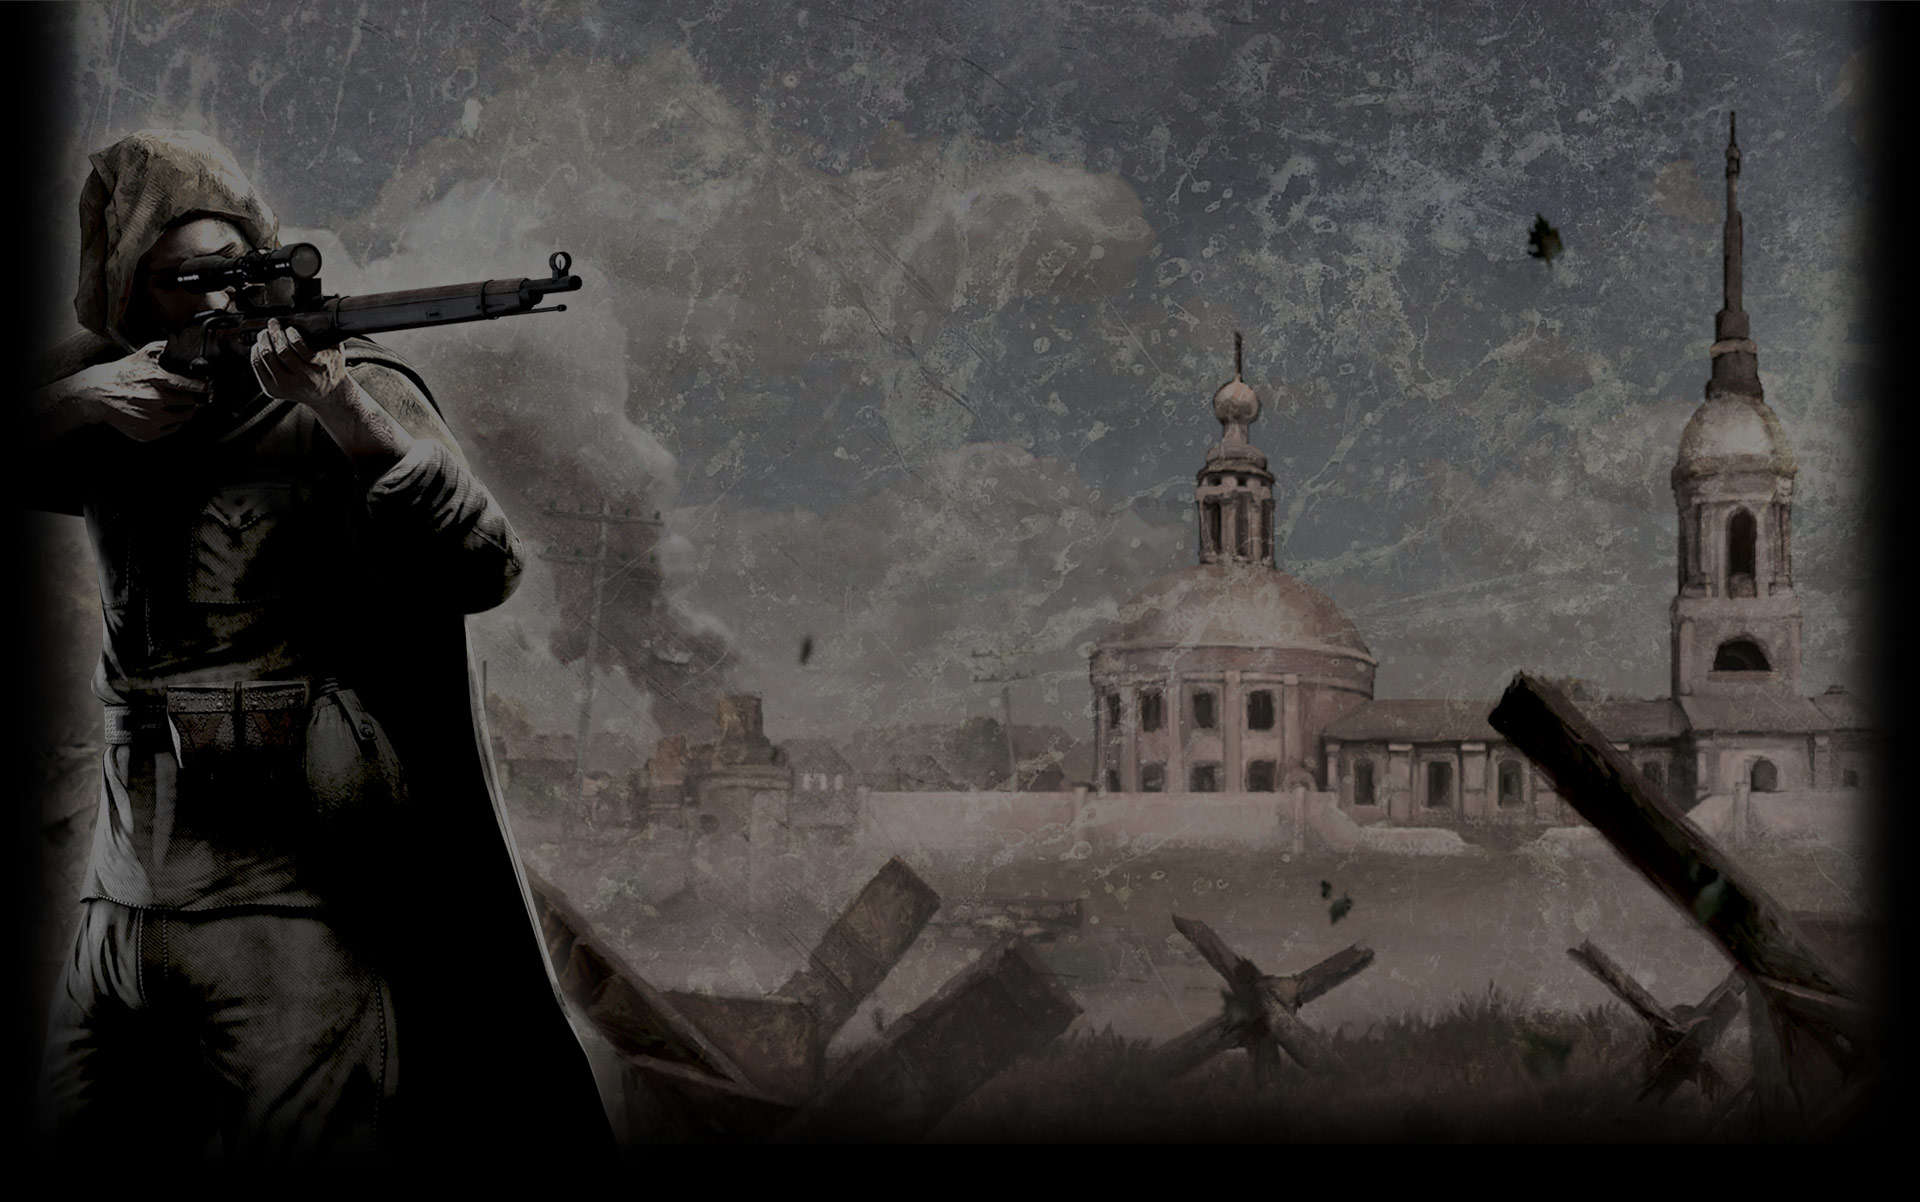 red orchestra 2 heroes of stalingrad save game